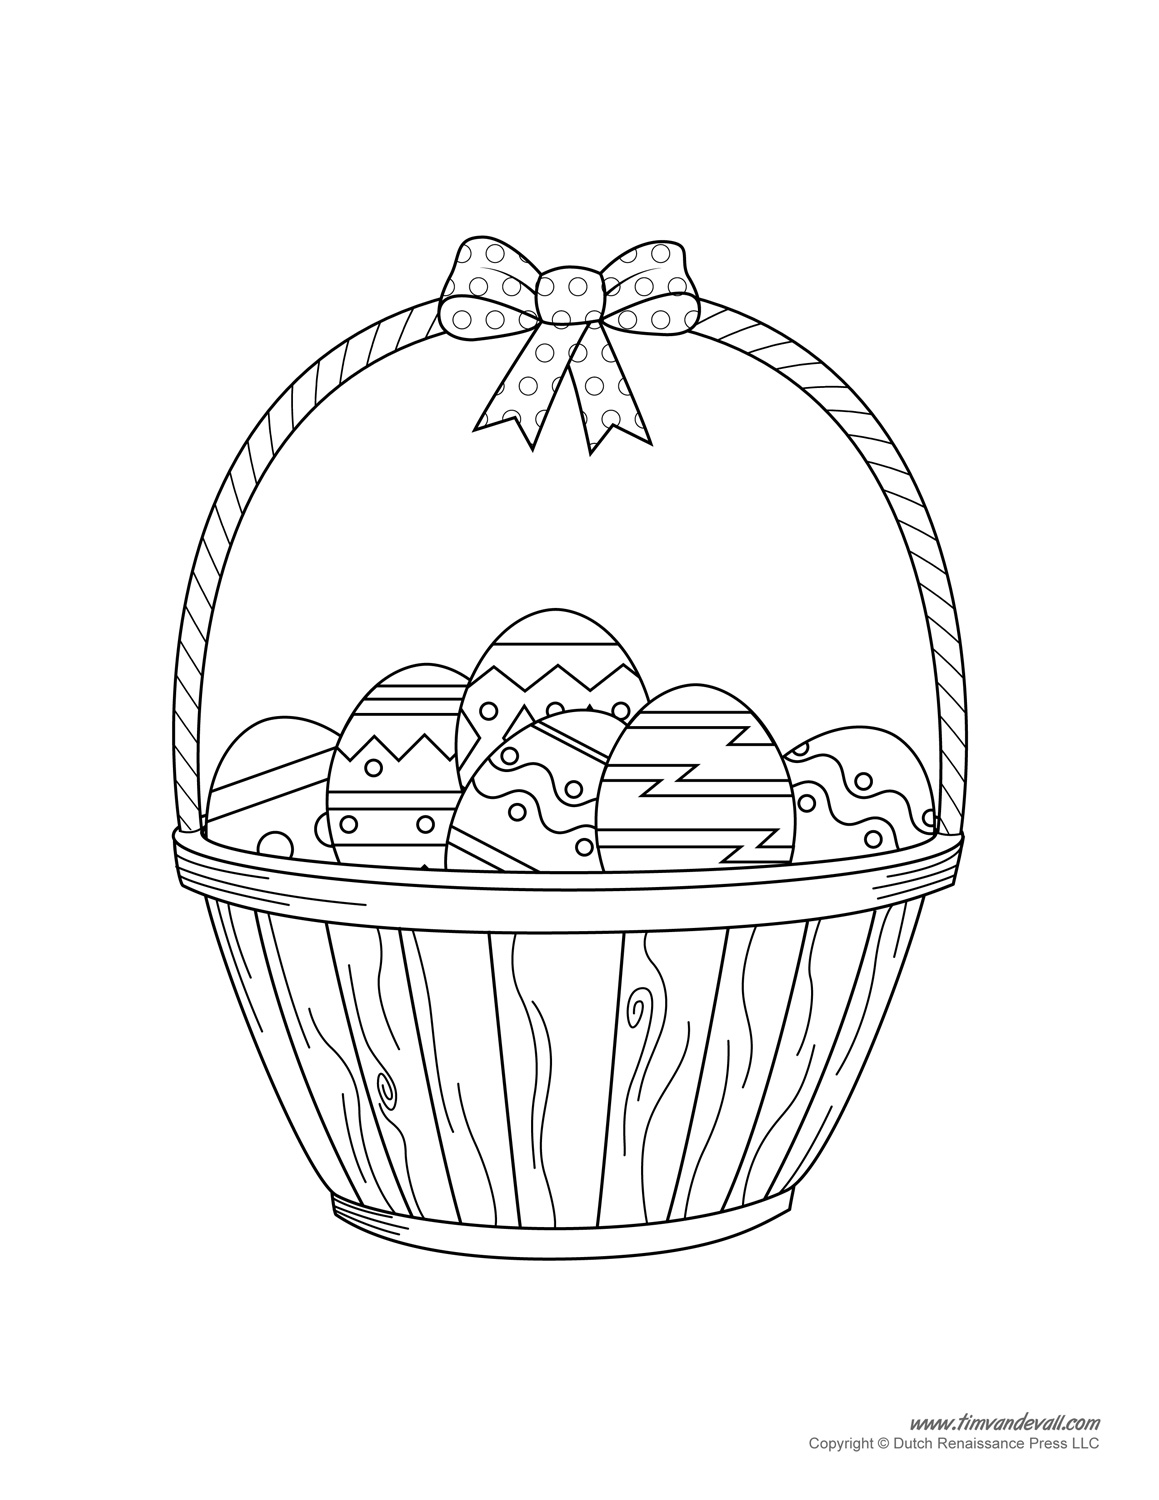 Easter basket coloring pages to download and print for free